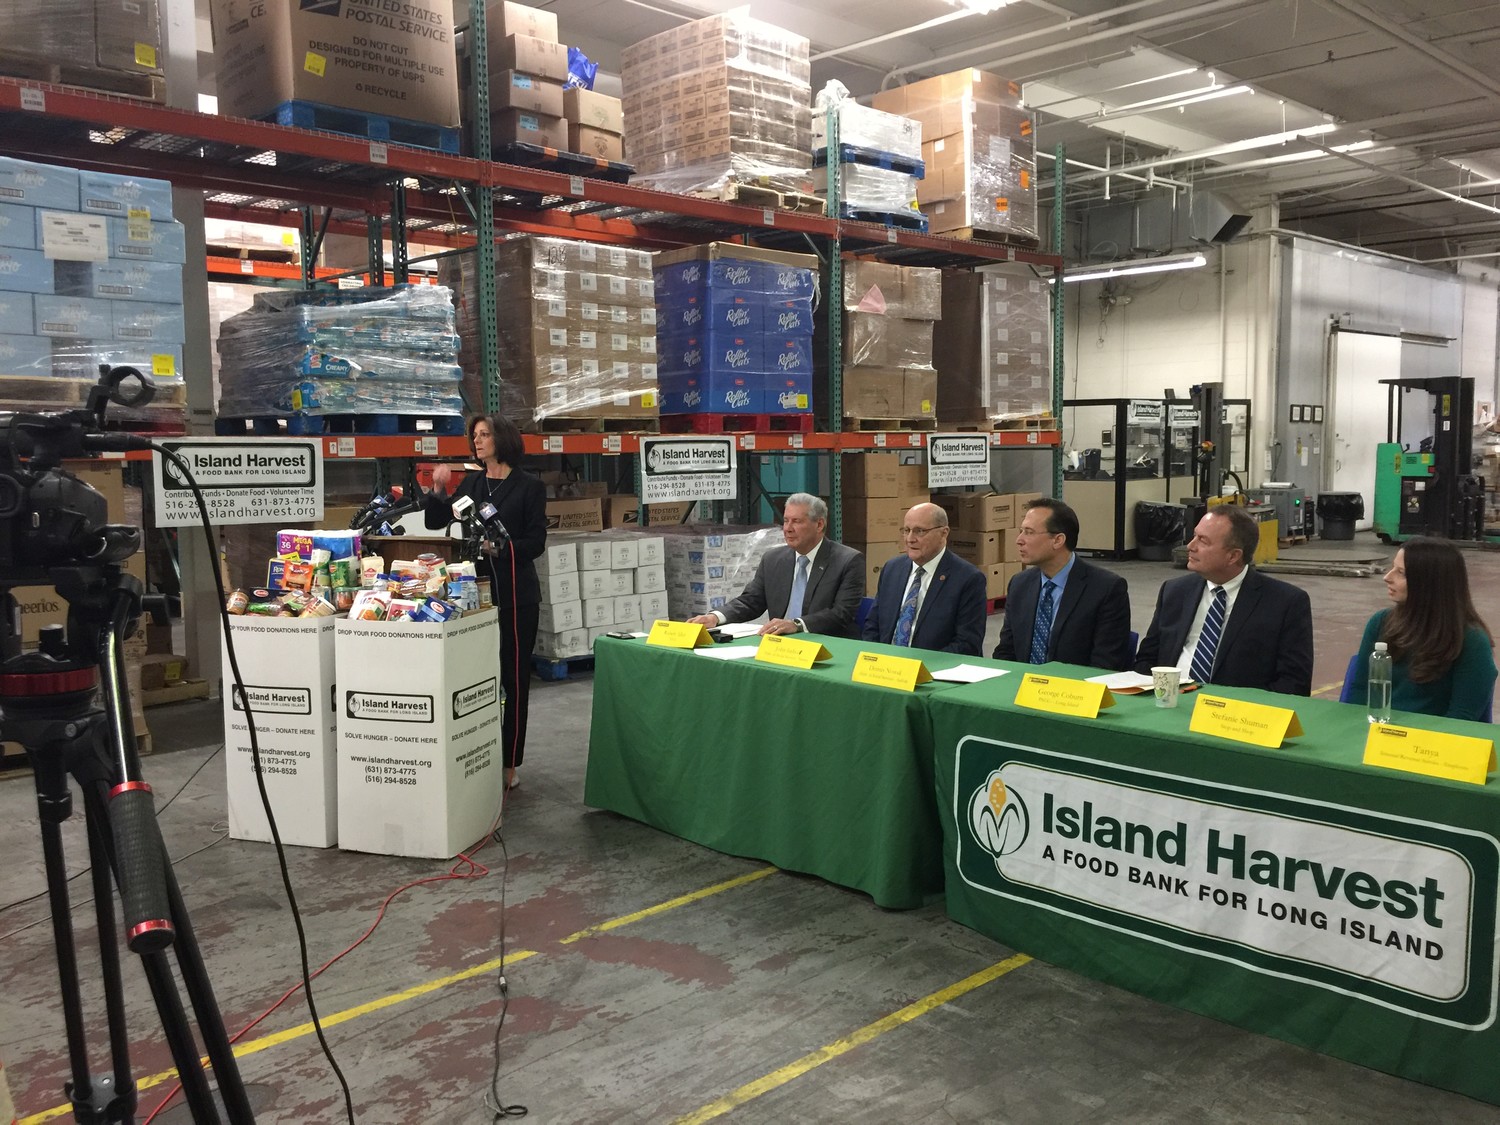 At a news conference on Jan. 17 at Island Harvest Food Bank, its president and chief executive officer, Randi Shubin Dresner, of East Meadow, joined local nonprofit, businesses and government leaders to announce that they would offer assistance to federal employees and contractors impacted by the government shutdown. Seated, from left, were Robert Allen, president and CEO of the Teachers Federal Credit Union; John Imhof, commissioner of the Nassau County Department of Social Services; Dennis Nowak, acting commissioner of the Suffolk County Department of Social Services; George Coburn, manager of customer experience at PSEG Long Island, and Stefanie Shuman, manager of external communications and community relations at Stop & Shop.